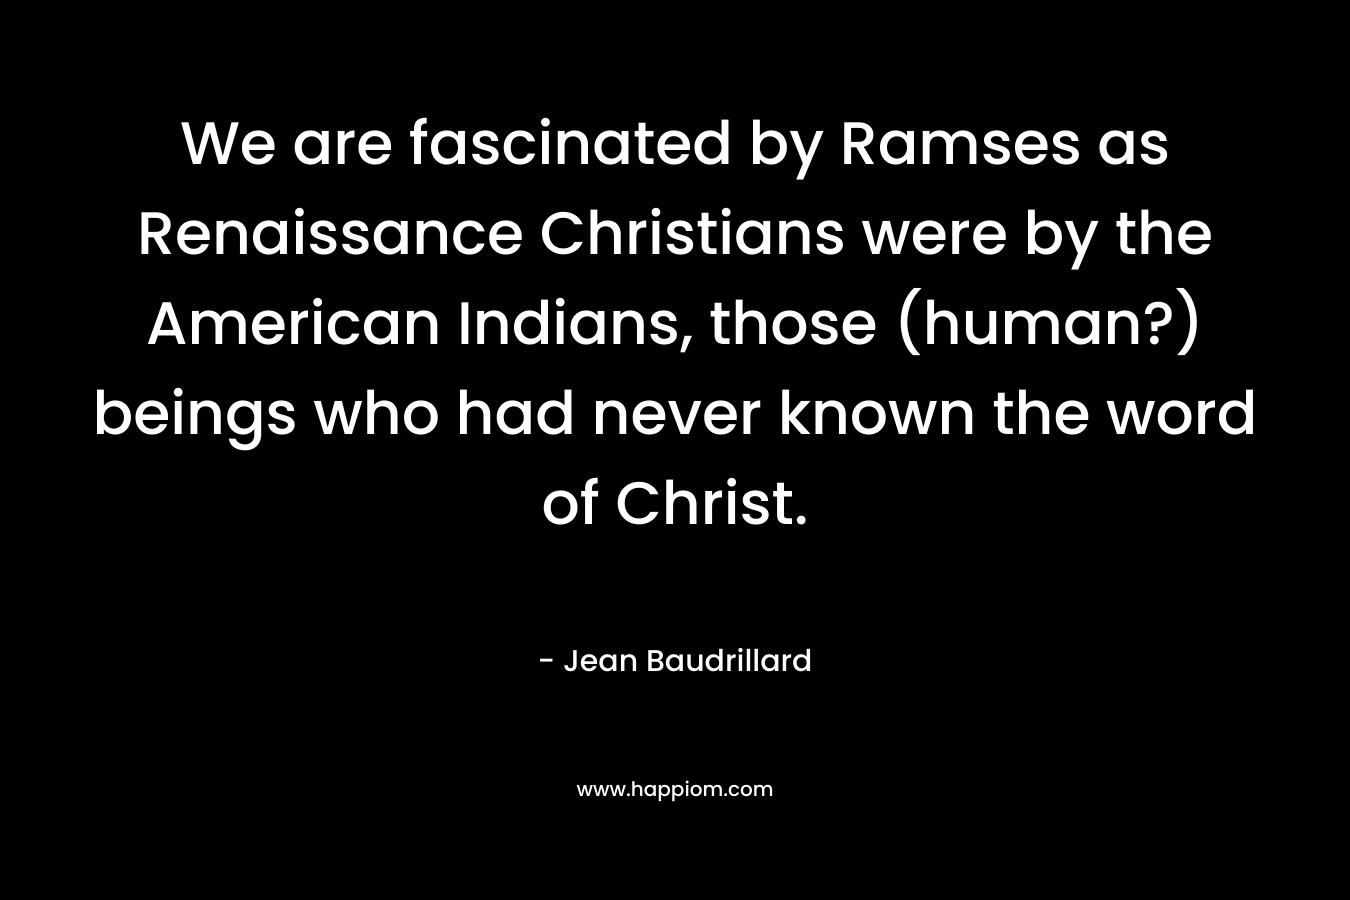 We are fascinated by Ramses as Renaissance Christians were by the American Indians, those (human?) beings who had never known the word of Christ. – Jean Baudrillard